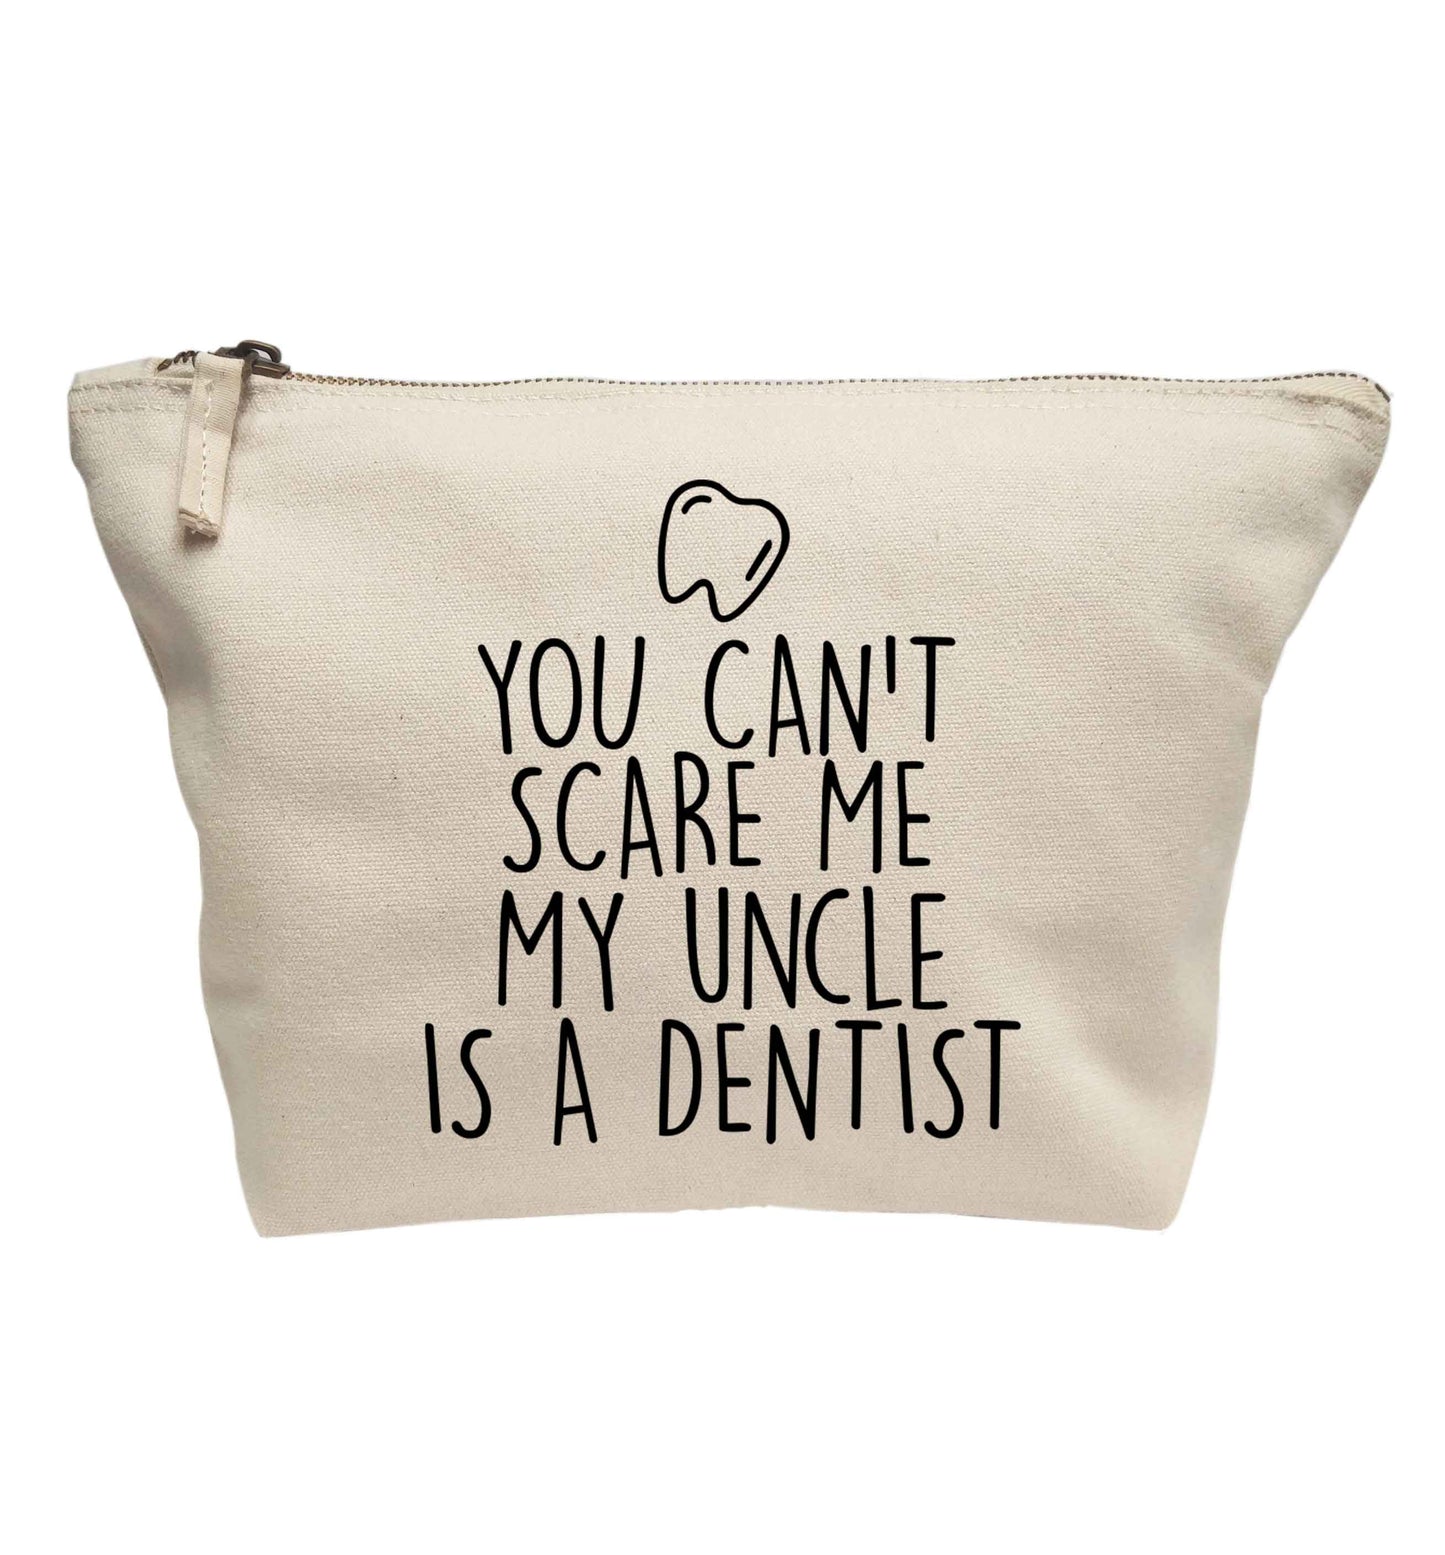 You can't scare me my uncle is a dentist | Makeup / wash bag